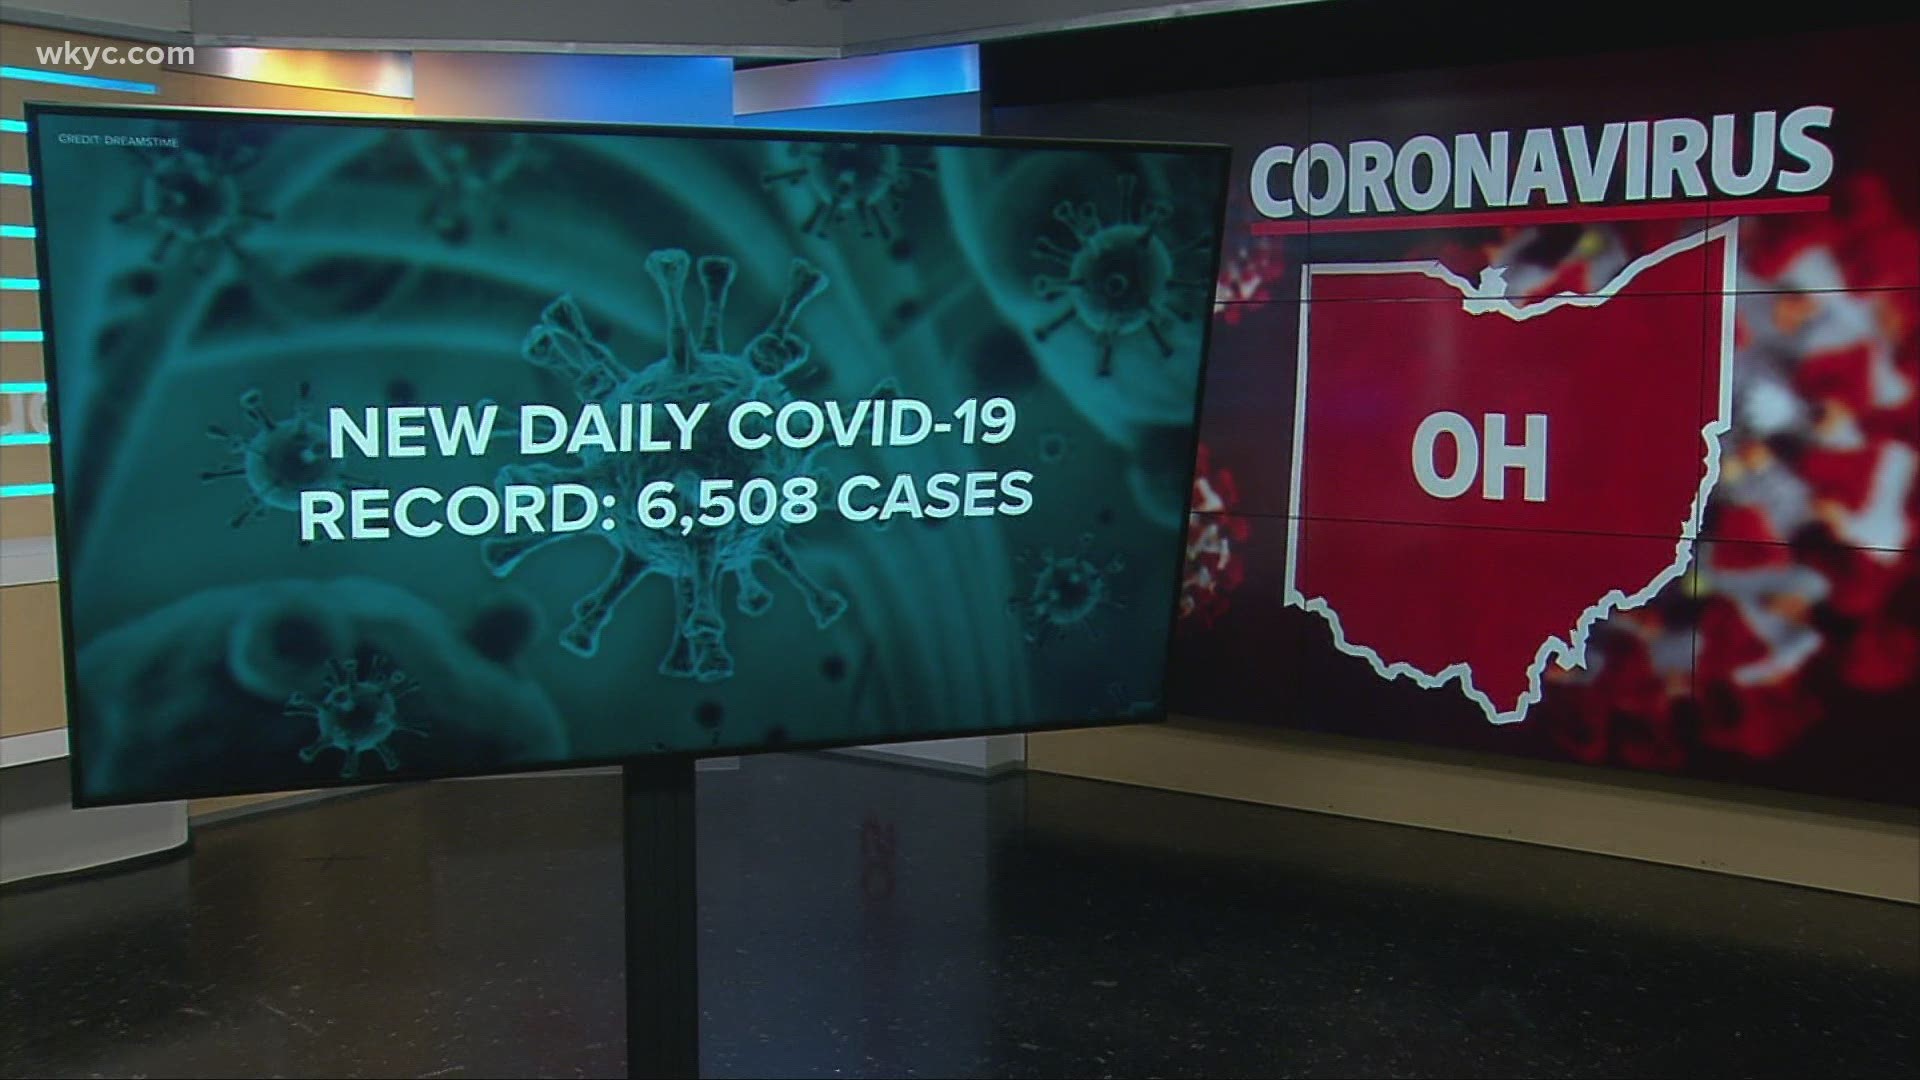 Nov. 11, 2020: We explore the latest coronavirus data as Ohio breaks another record with more than 6,500 infections.